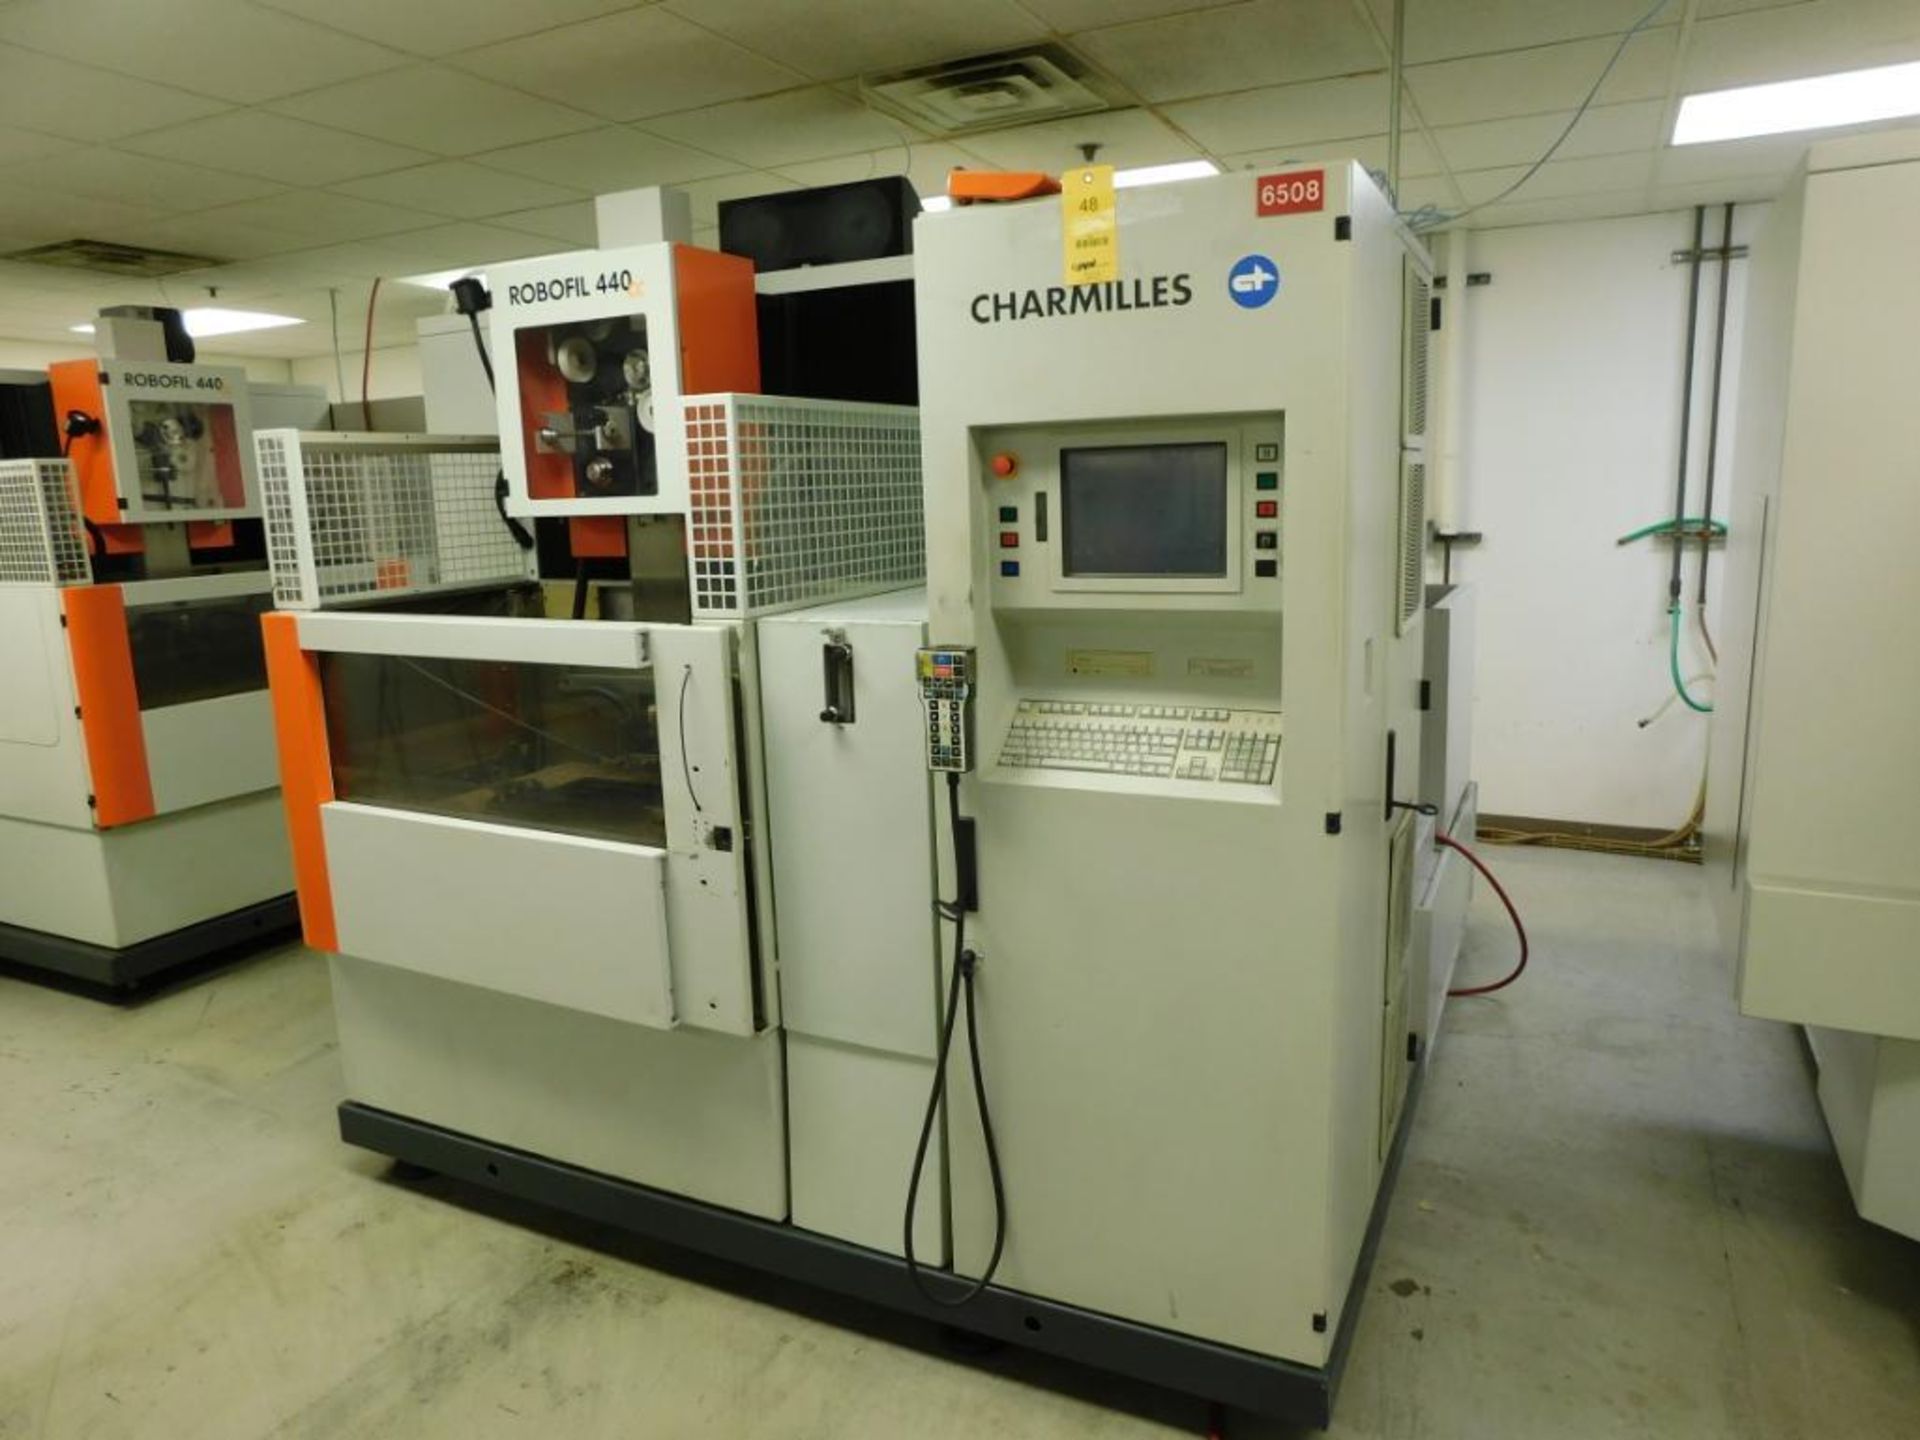 Charmilles CNC Wire EDM Machine, Model Robofil 440 CC, S/N 931208, 21.65 in. X-Axis, 13.78 in. Y-Axi